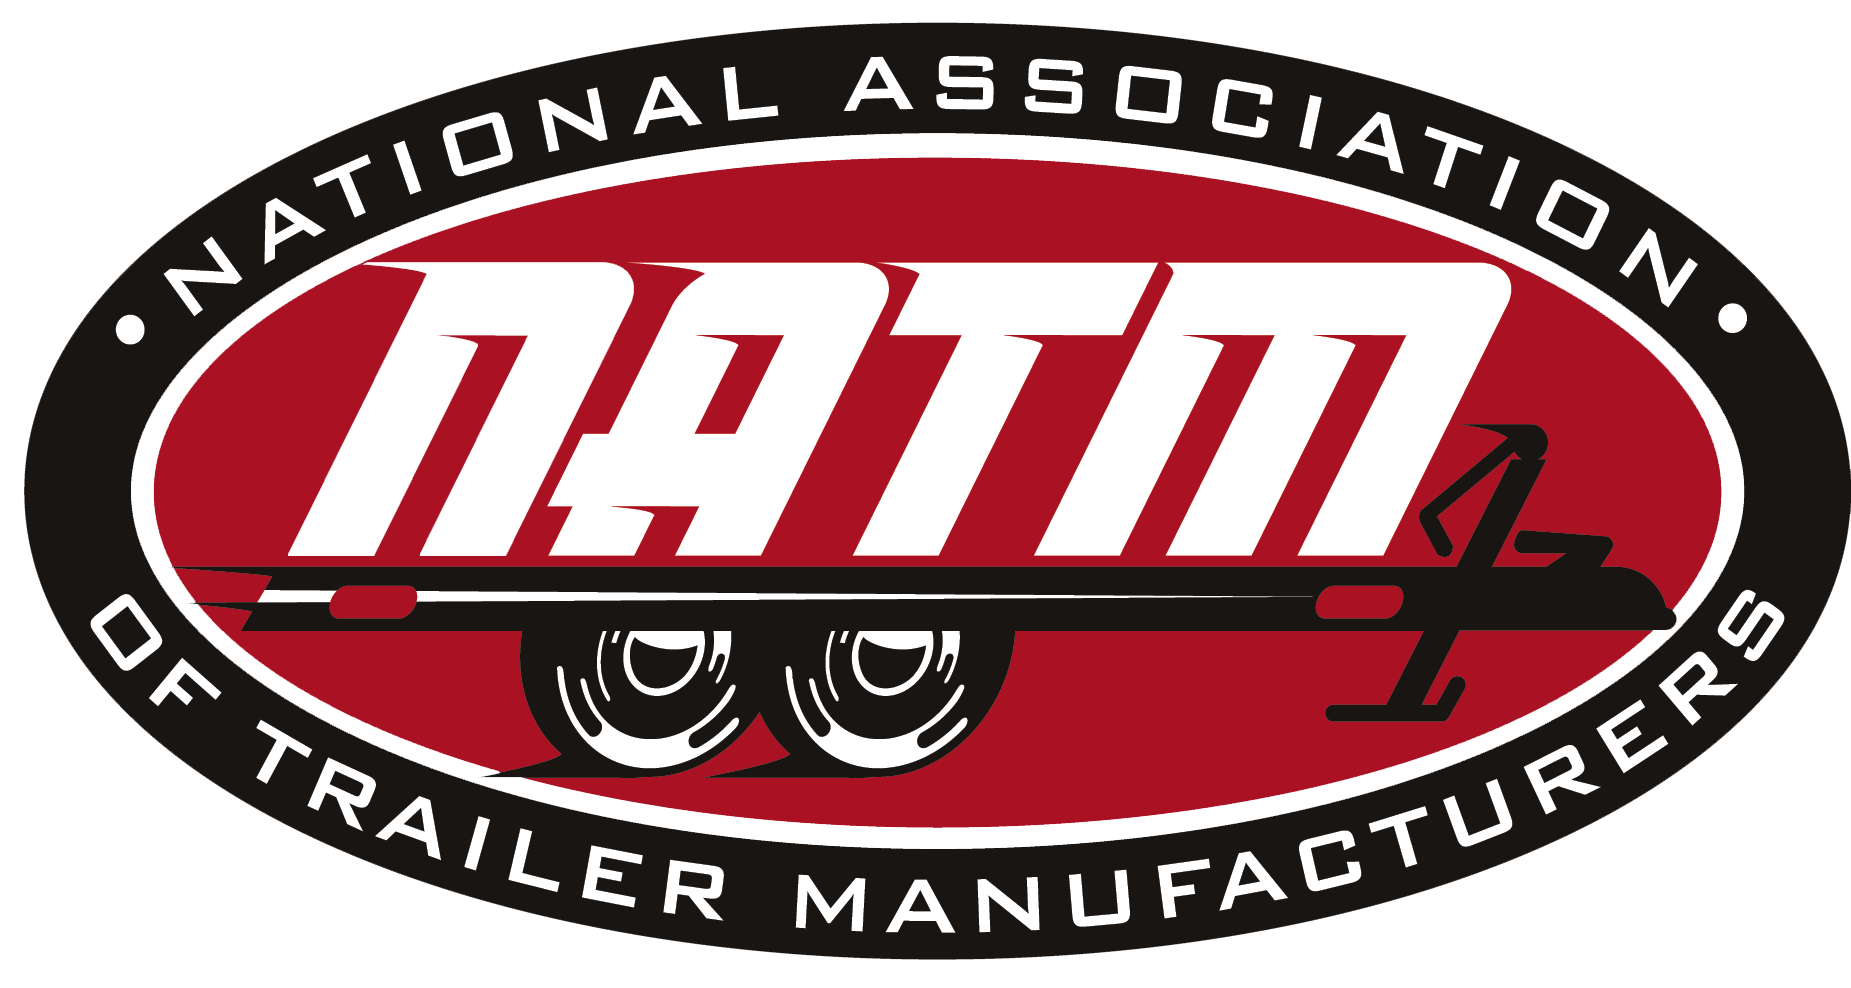 national-association-of-trailer-manufacturing